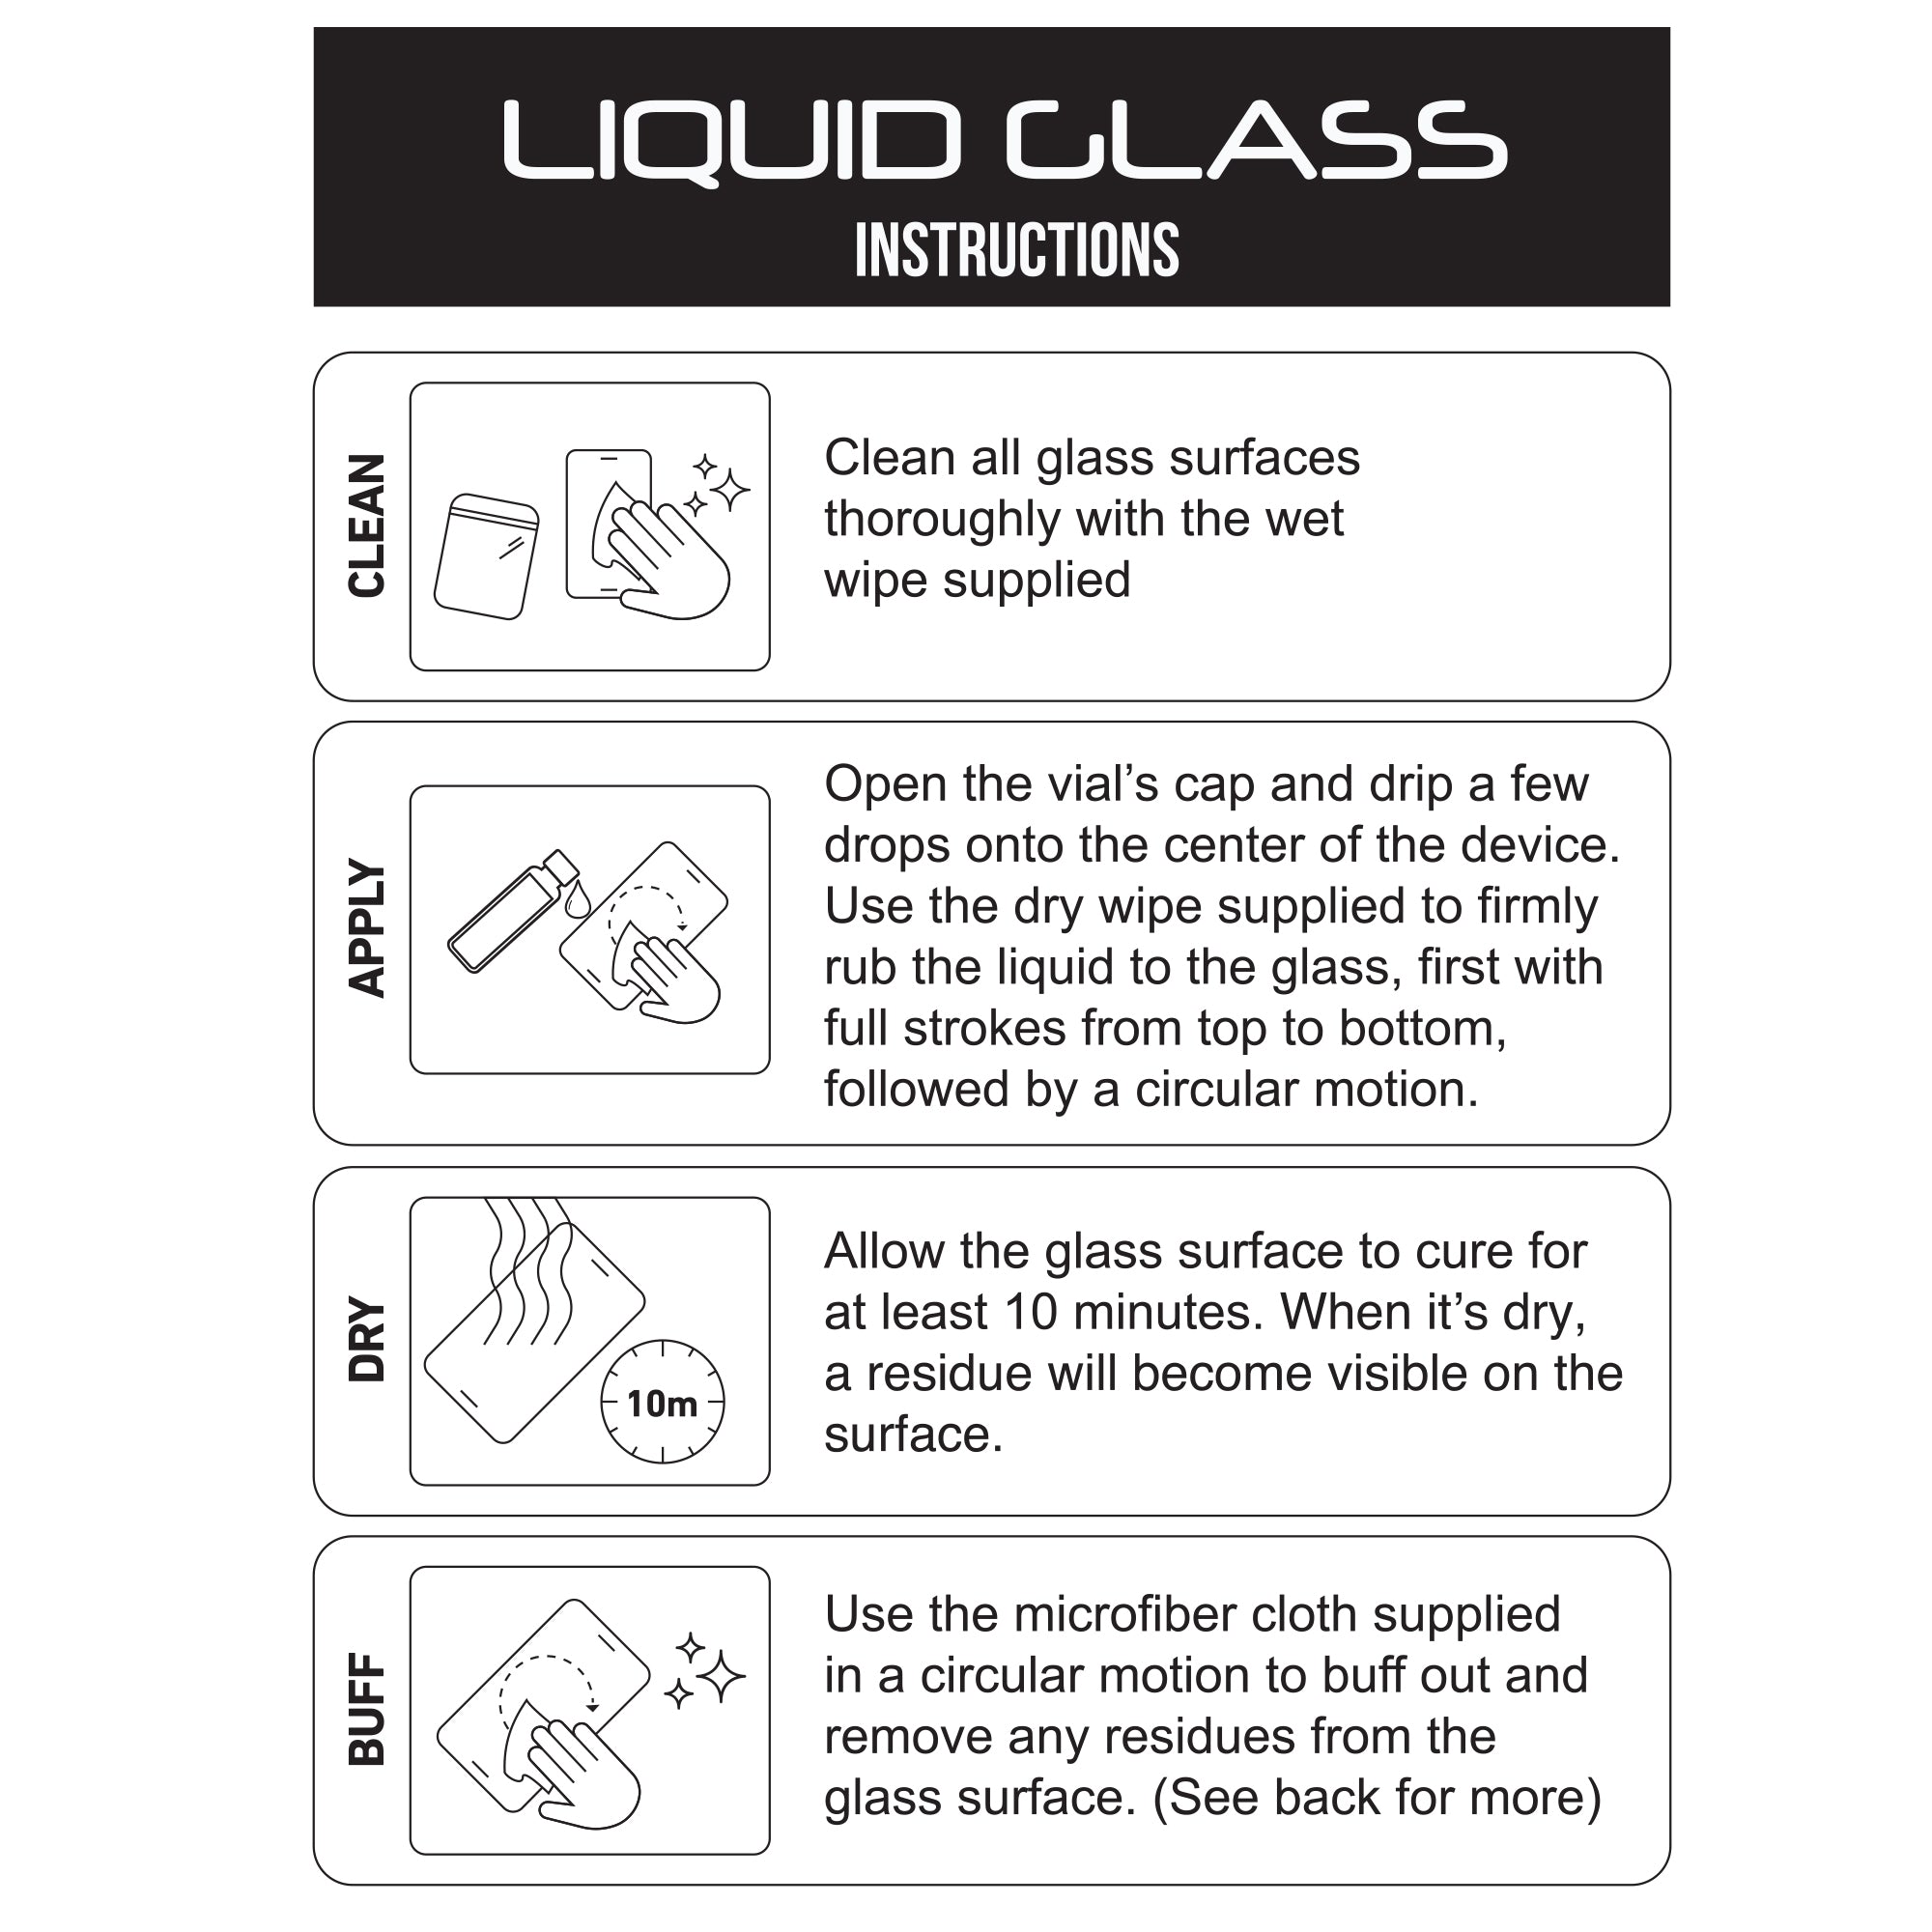 Liquid Glass Screen Protector with $350 Screen Replacement Guarantee - Universal